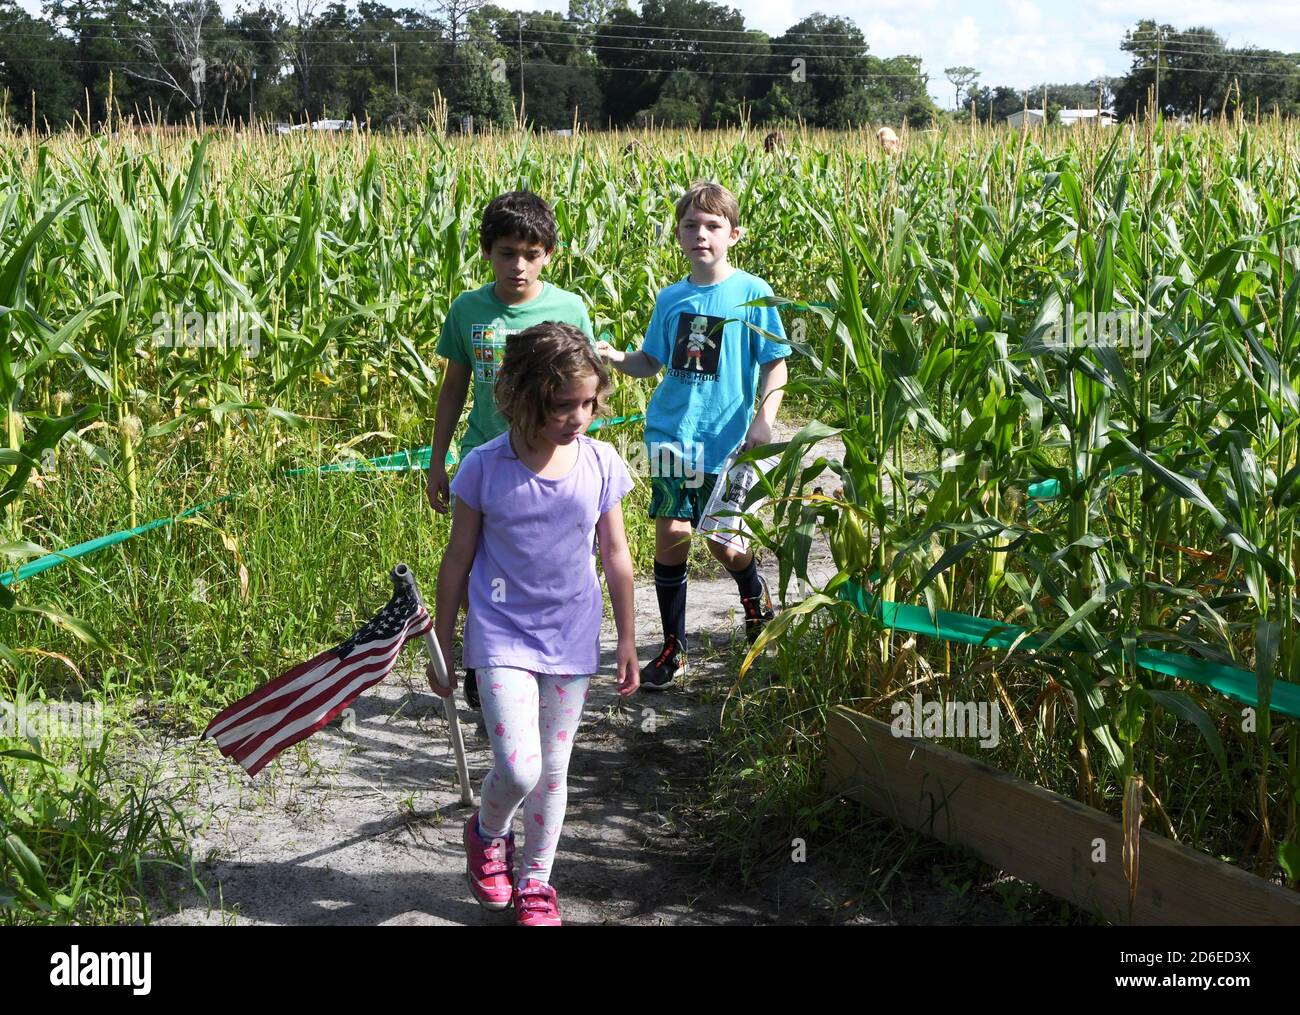 Mt. Dora, United States. 15th Oct, 2020. October 15, 2020 - Mt. Dora, Florida, United States - Children navigate the annual fall corn maze at Long and Scott Farms on October 15, 2020 in Mt. Dora, Florida. The theme for this yearÕs 6-acre maze, which is open with social distancing during the coronavirus pandemic, is 'Farm to Table.' Credit: Paul Hennessy/Alamy Live News Stock Photo